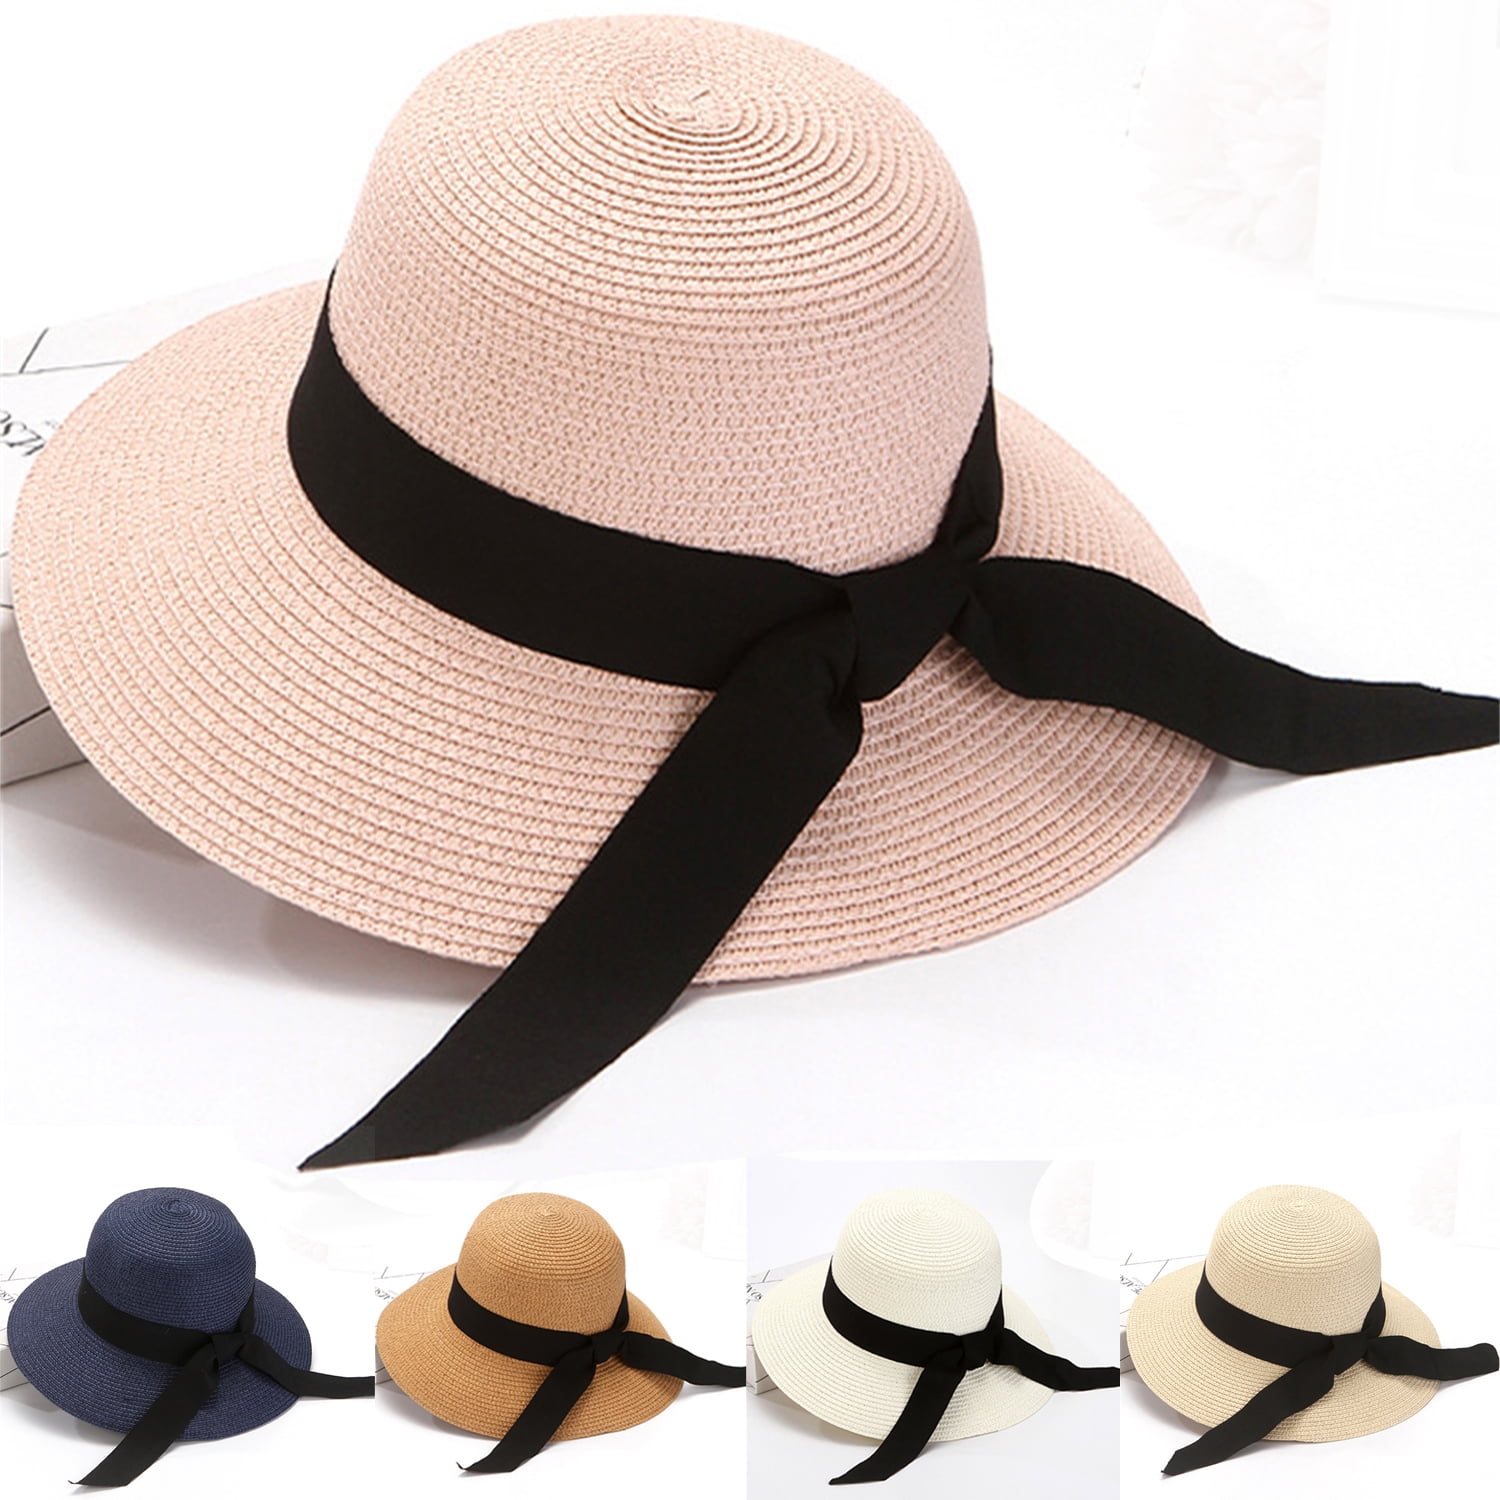 Yuanbang Women Sun Hat Summer Accessories Breathable Beach Straw Hat Lace Up Bandage Cap Panama, adult Unisex, Size: One size, Beige